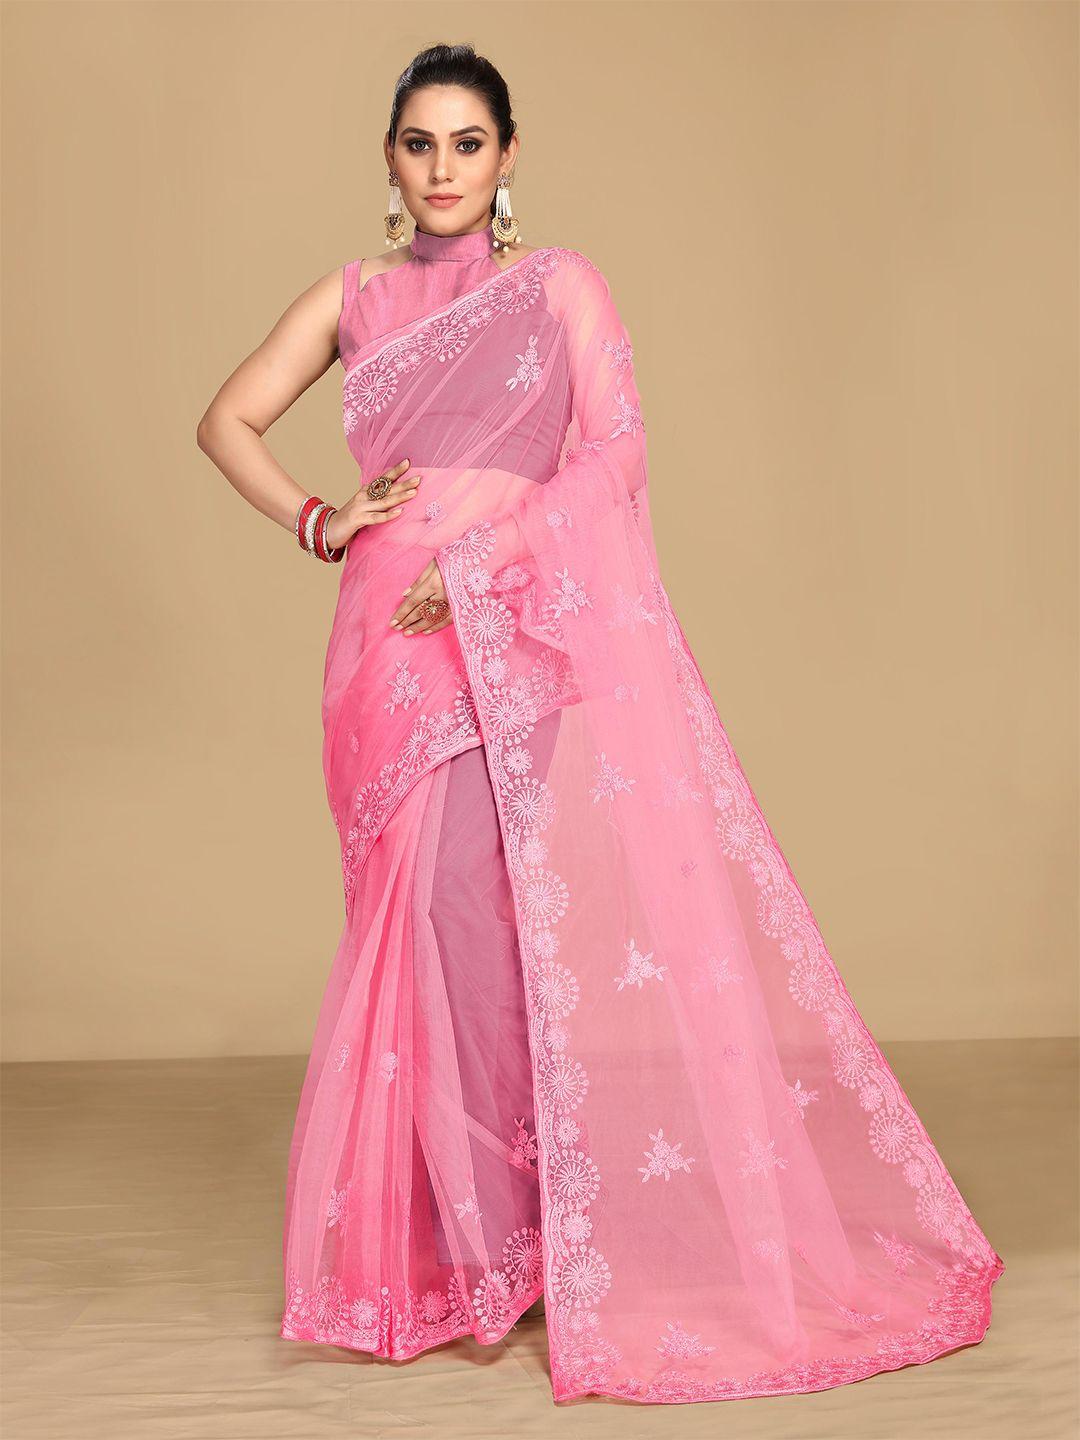 VAIRAGEE Pink & Silver-Toned Floral Embroidered Net Saree